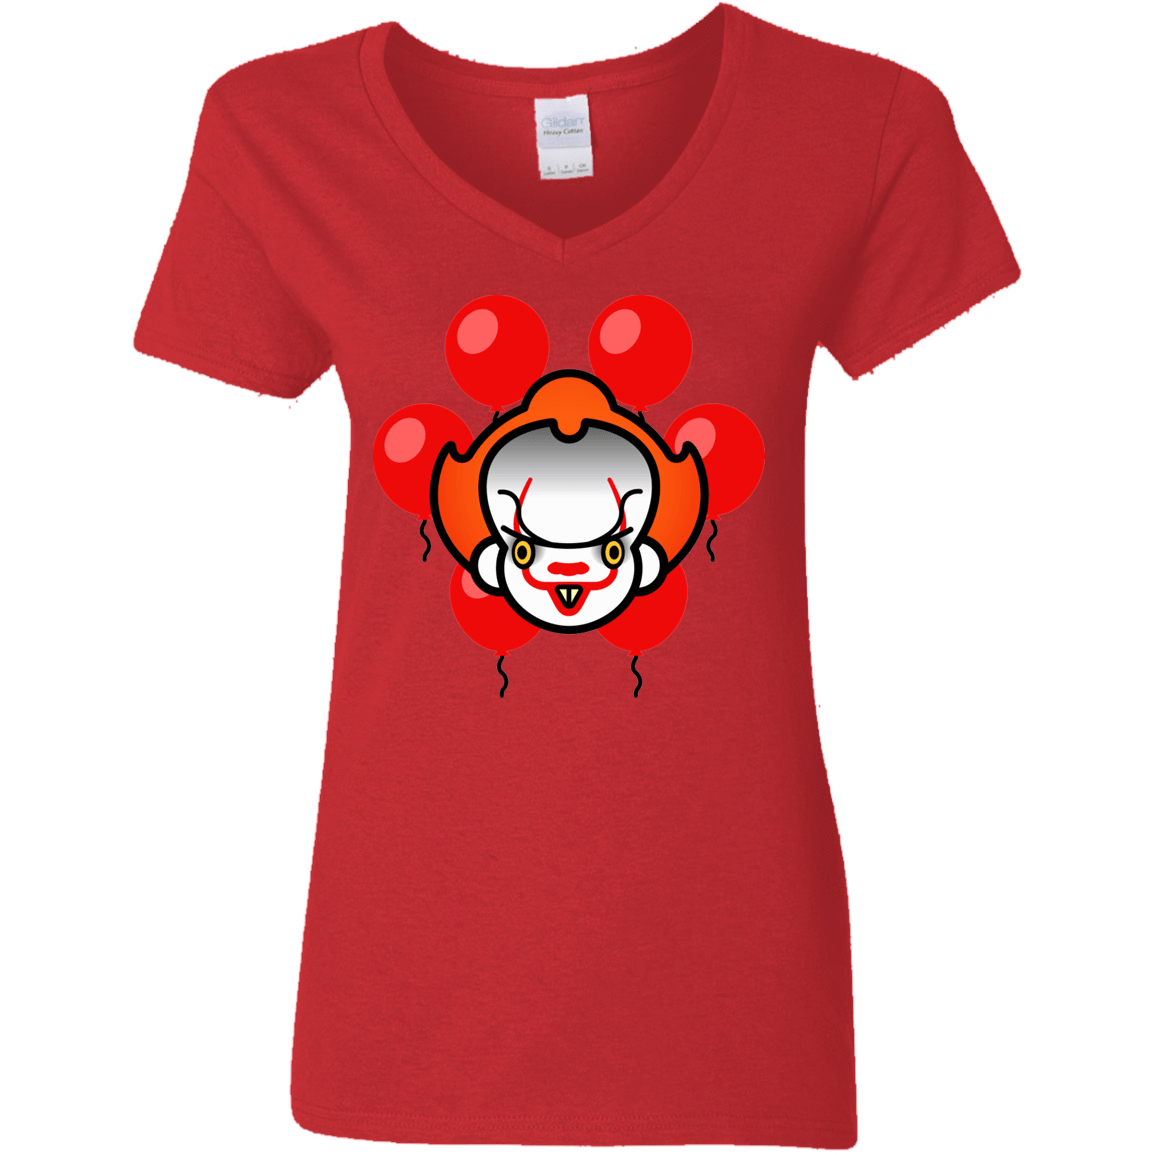 T-Shirts Red / S Chibiwise Women's V-Neck T-Shirt